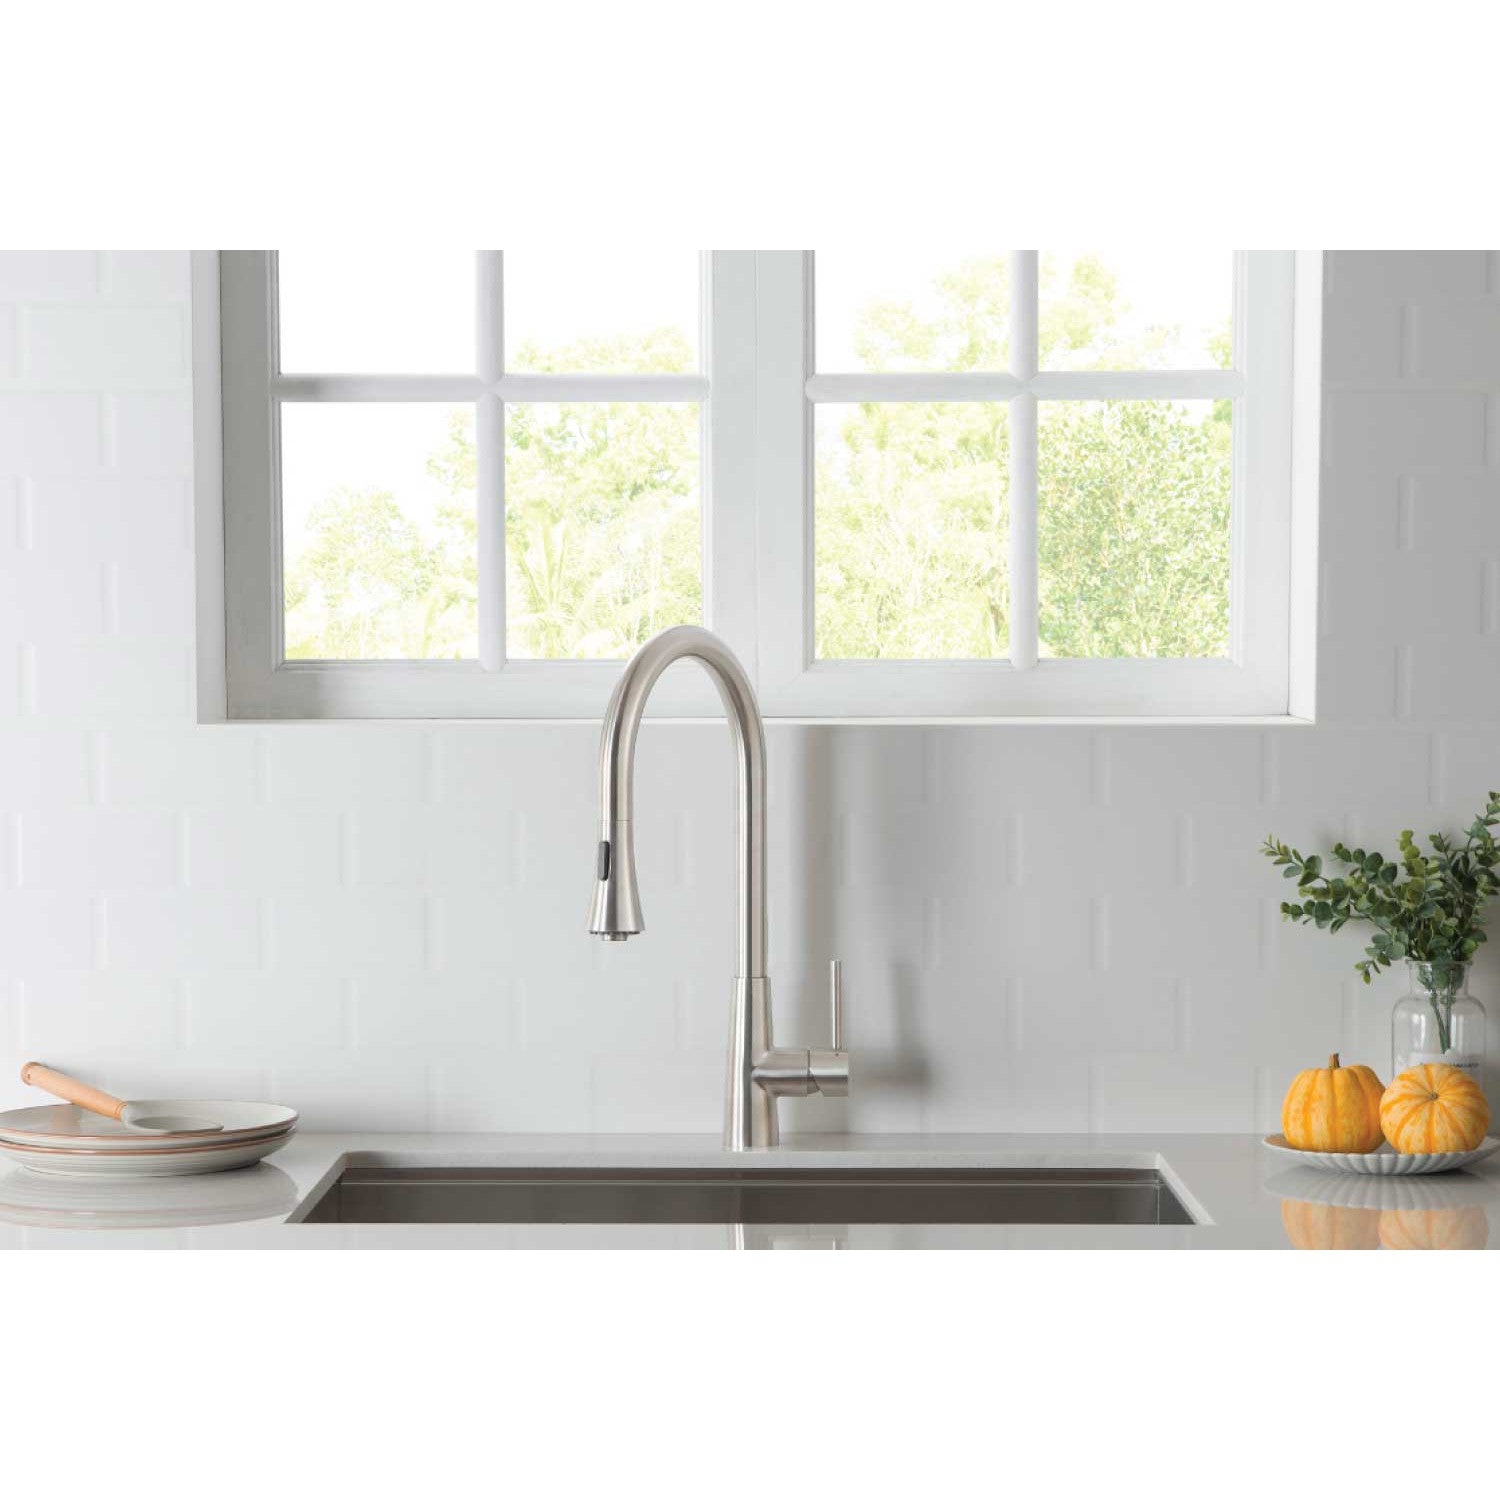 Isenberg Klassiker Zest 18" Single Hole Dark Gray Stainless Steel Pull-Down Kitchen Faucet With Dual Function Sprayer